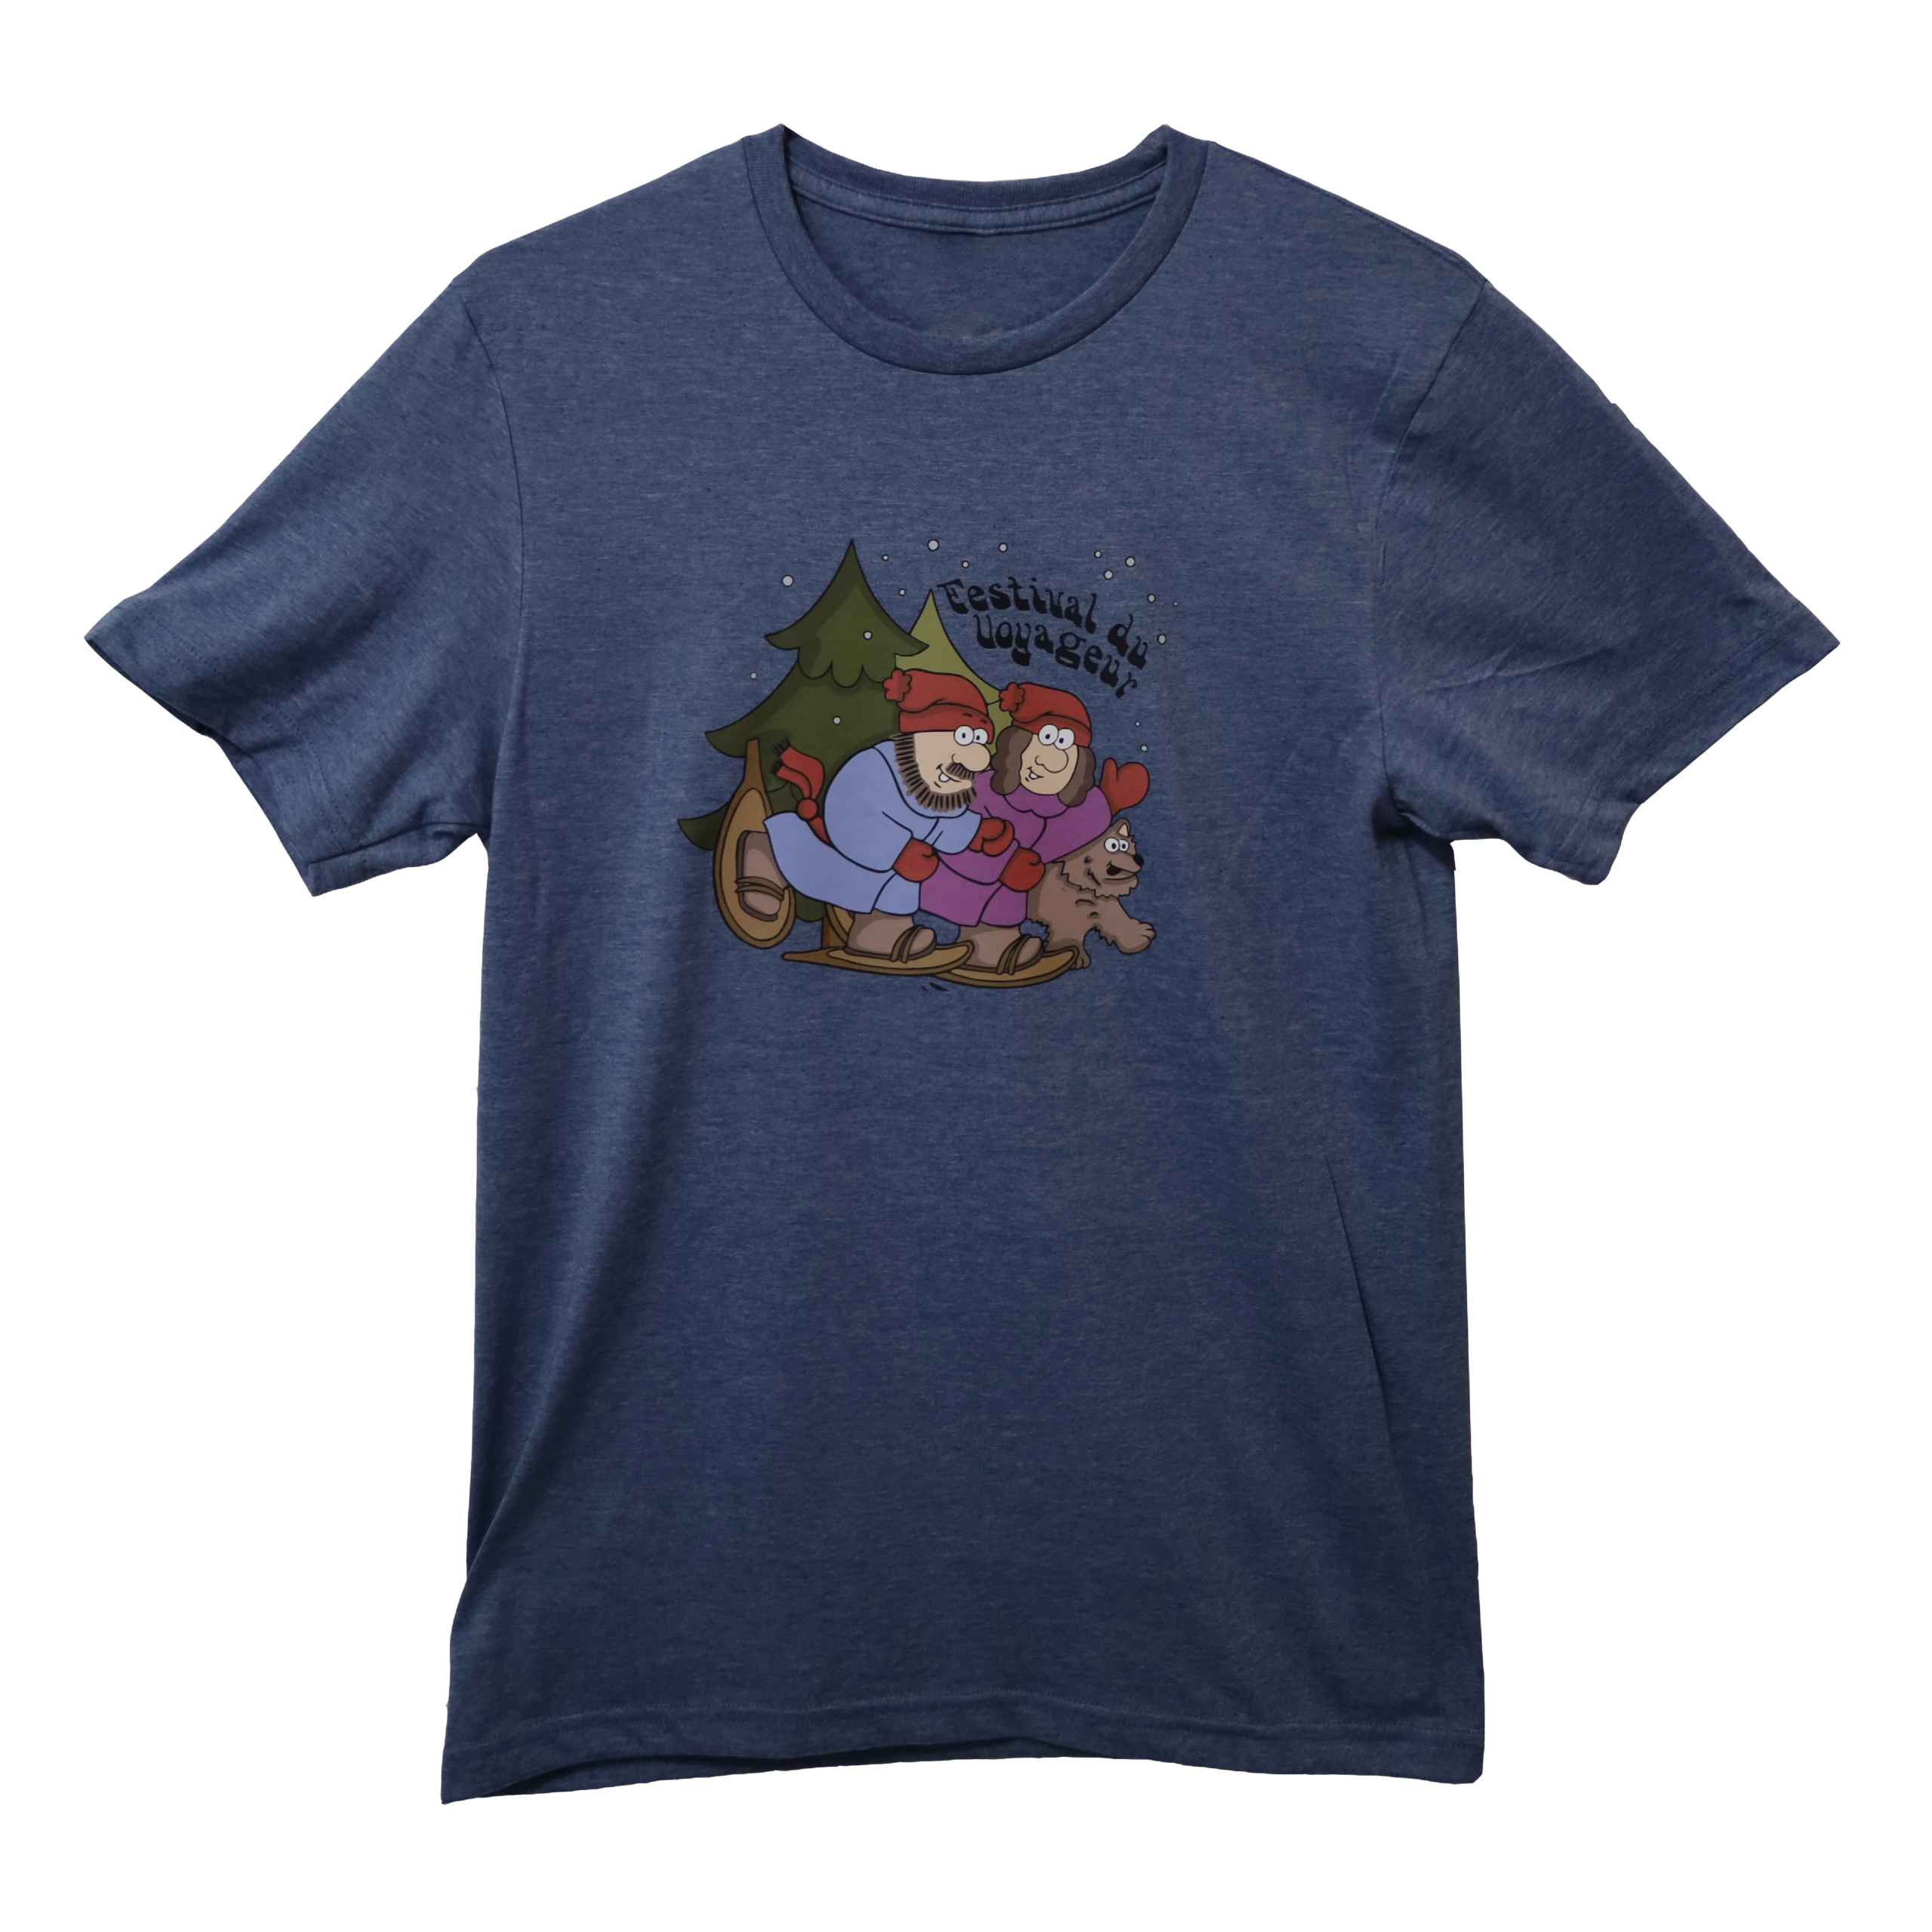 Featured image for “T-SHIRT RAQUETTE”